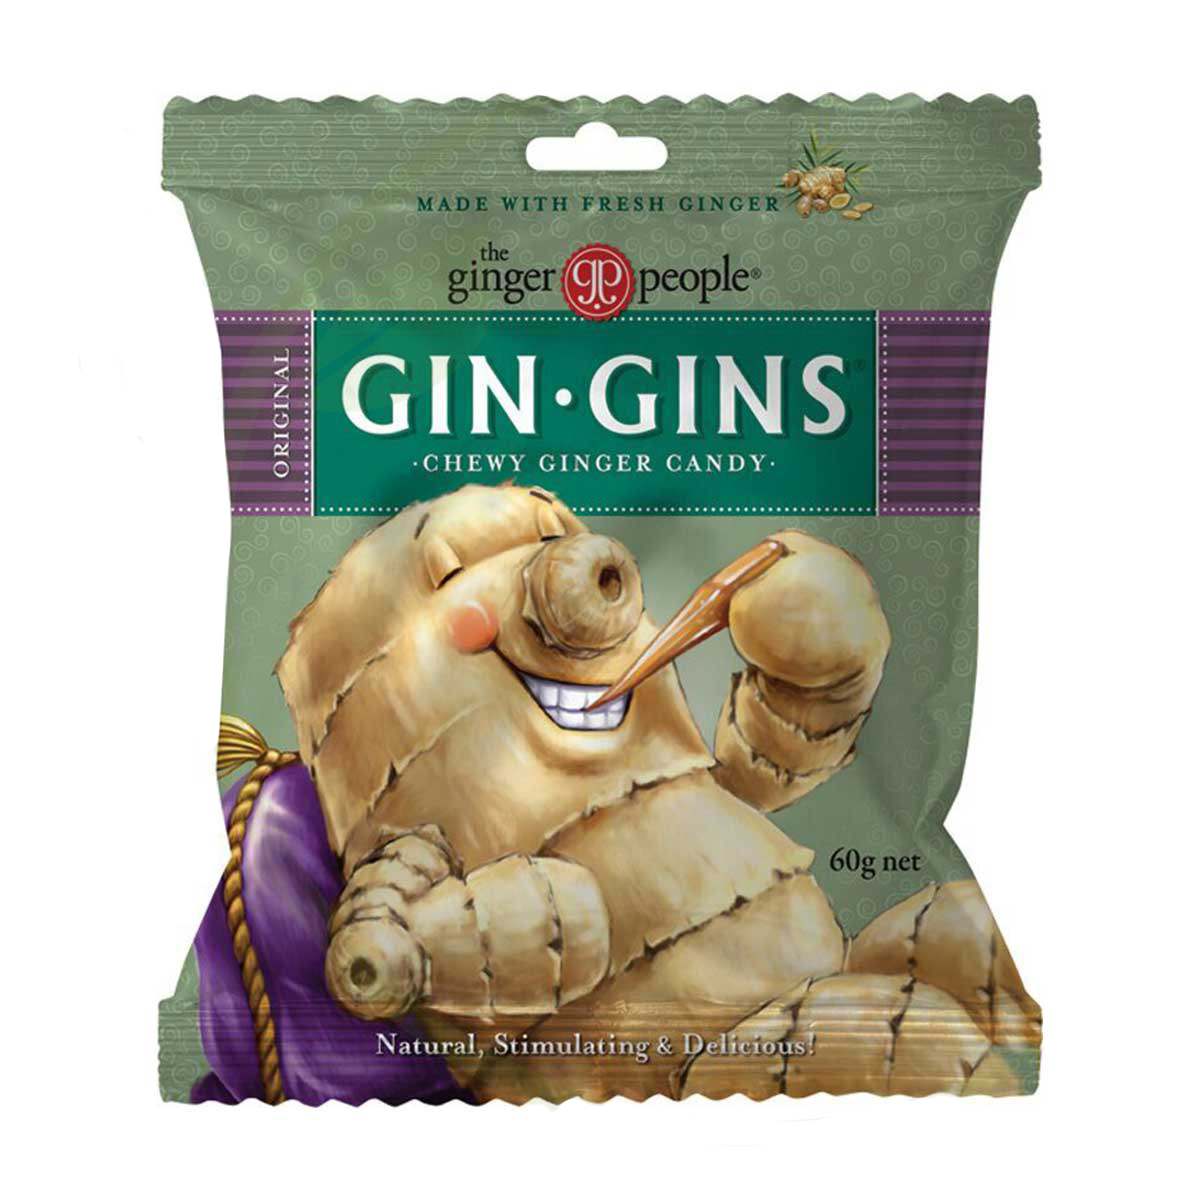 The Ginger People - Gin Gins Original Chewy Ginger Candy